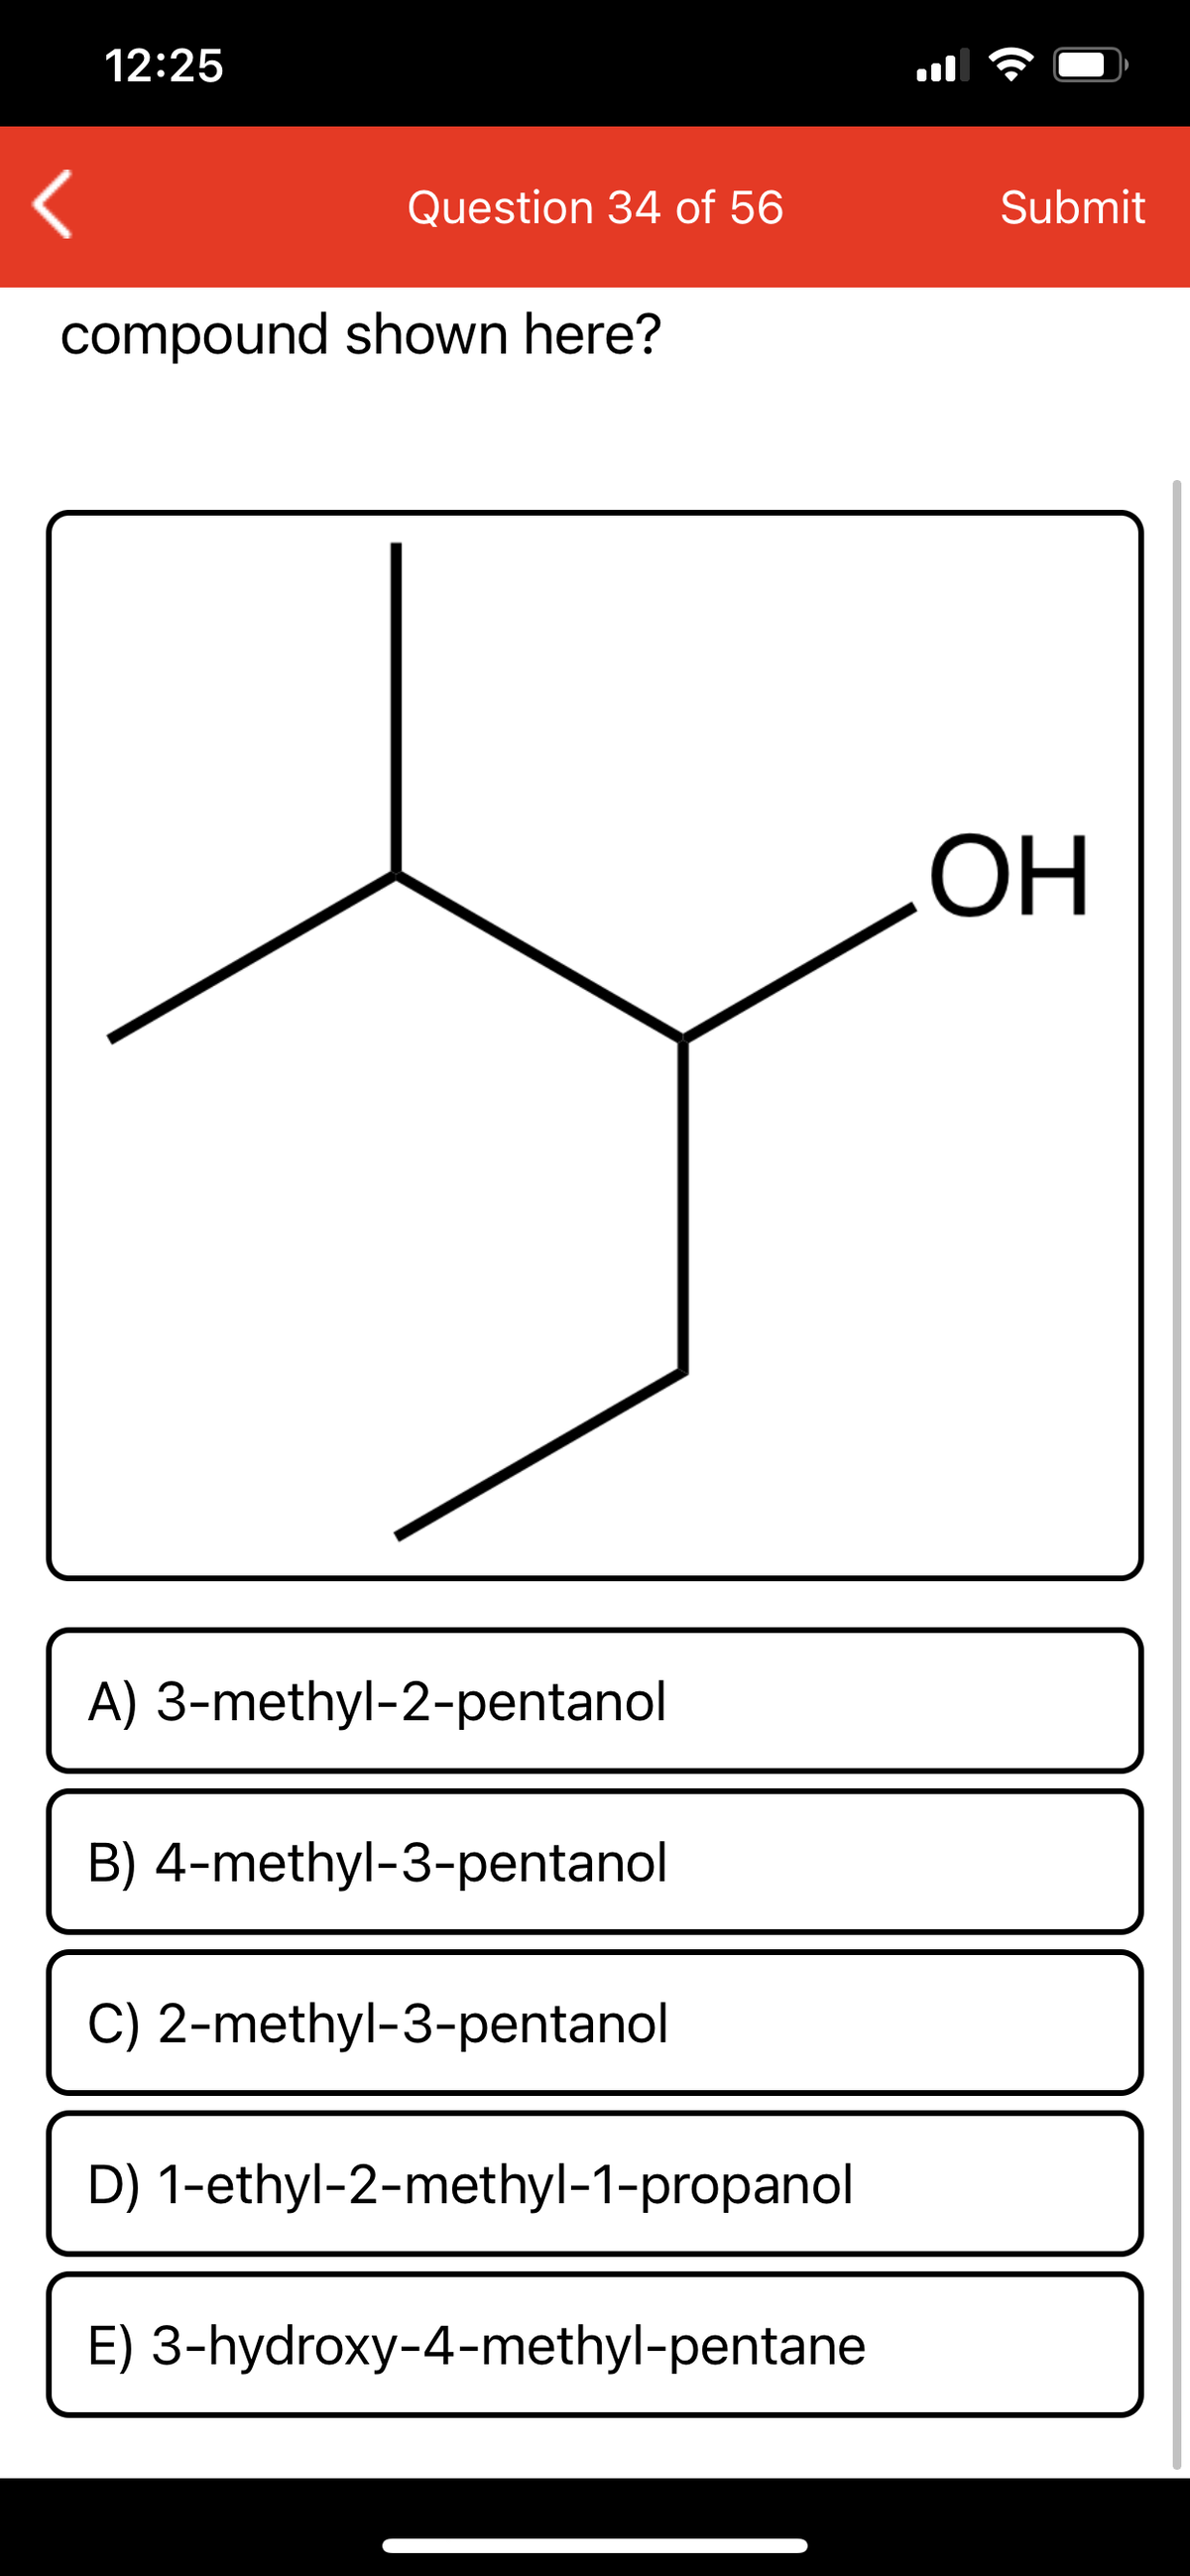 12:25
Question 34 of 56
Submit
compound shown here?
ОН
A) 3-methyl-2-pentanol
B) 4-methyl-3-pentanol
C) 2-methyl-3-pentanol
D) 1-ethyl-2-methyl-1-propanol
E) 3-hydroxy-4-methyl-pentane
